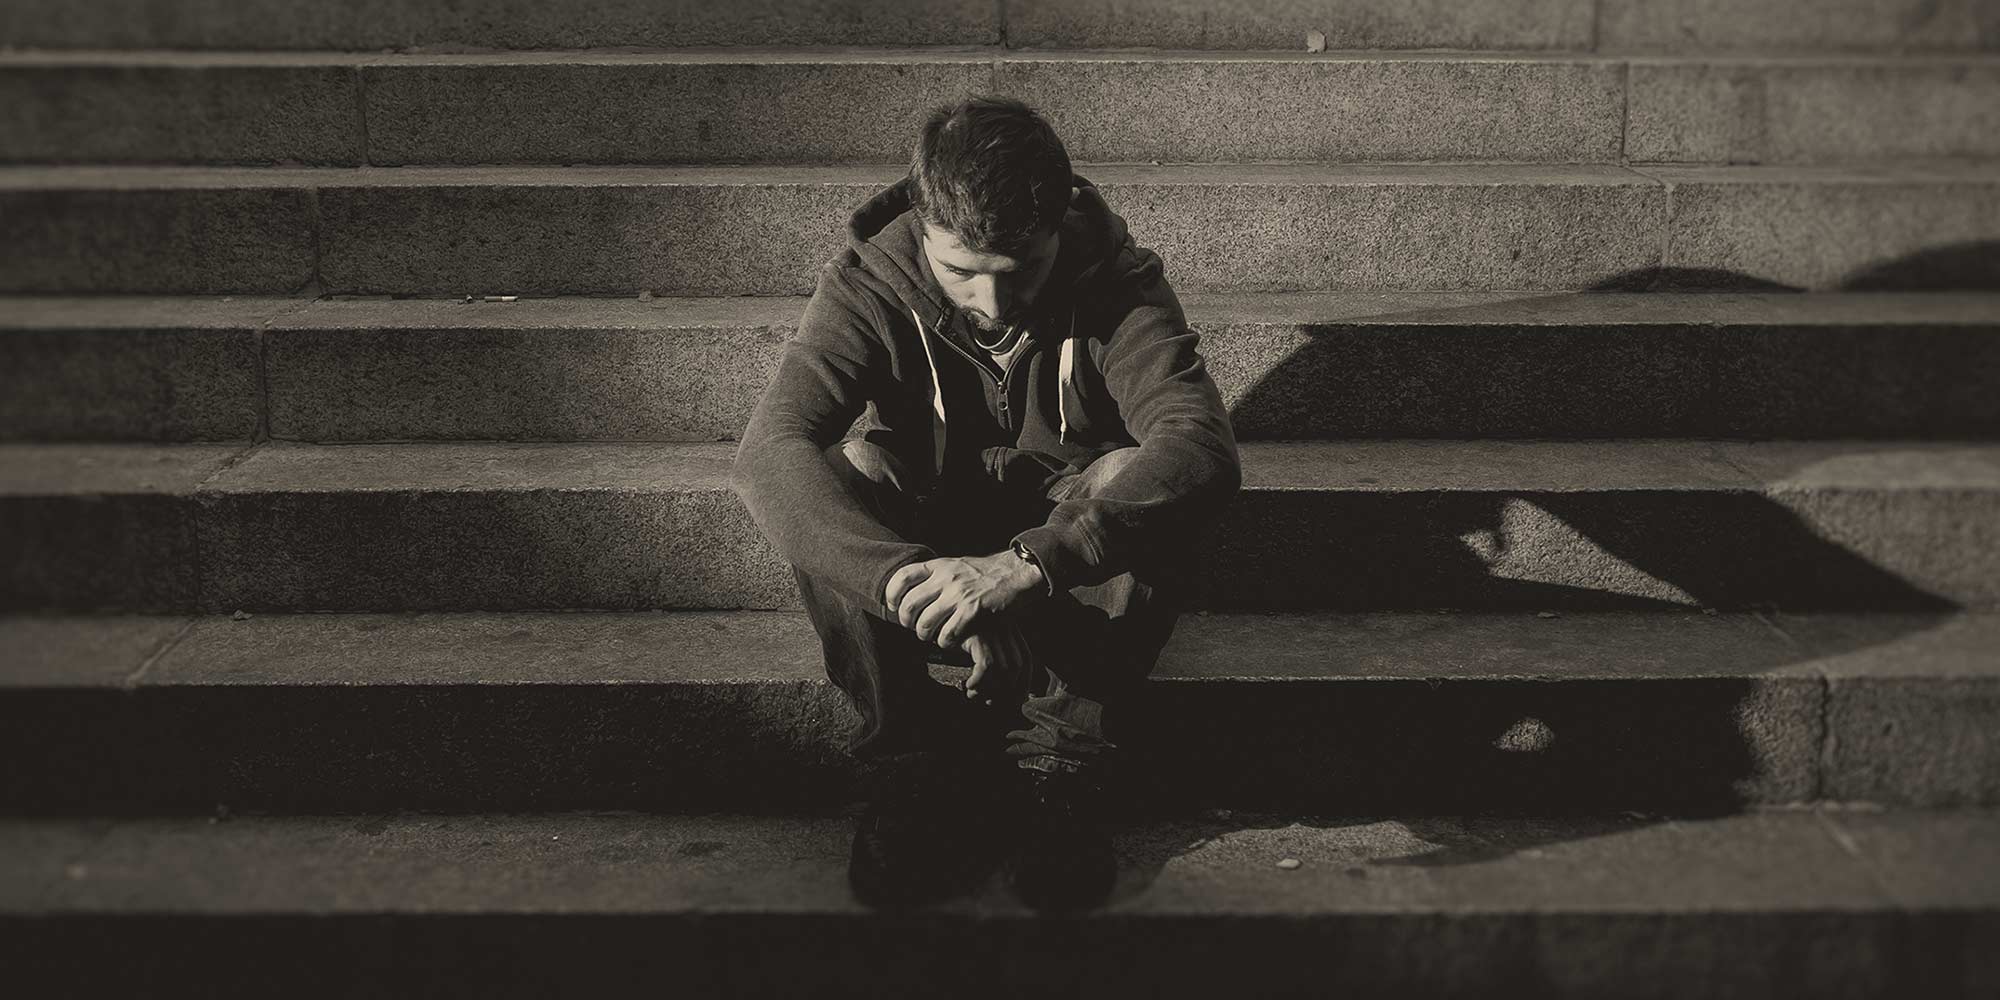 Man in a hoodie sitting sadly on outdoor stairs. Does withdrawal cause depression?